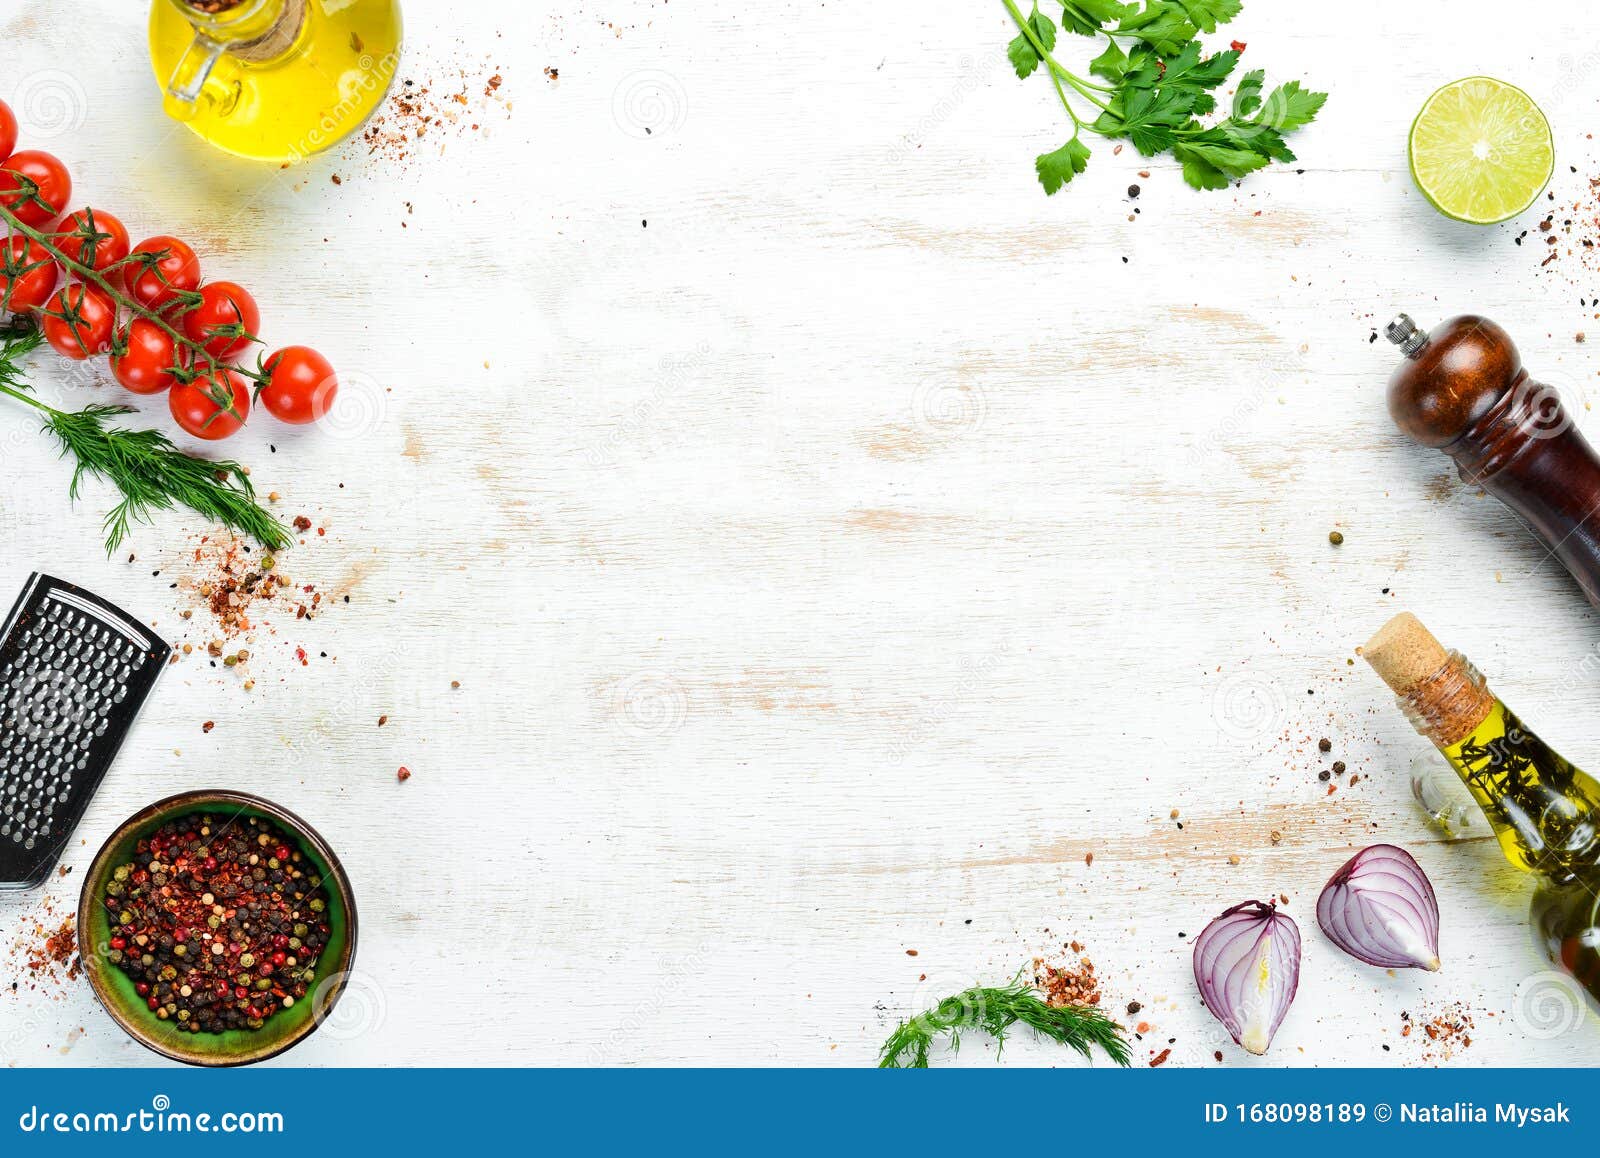 Food Banner. Spices, Vegetables and Herbs on a White Wooden Background. Top  View Stock Image - Image of cuisine, stone: 168098189